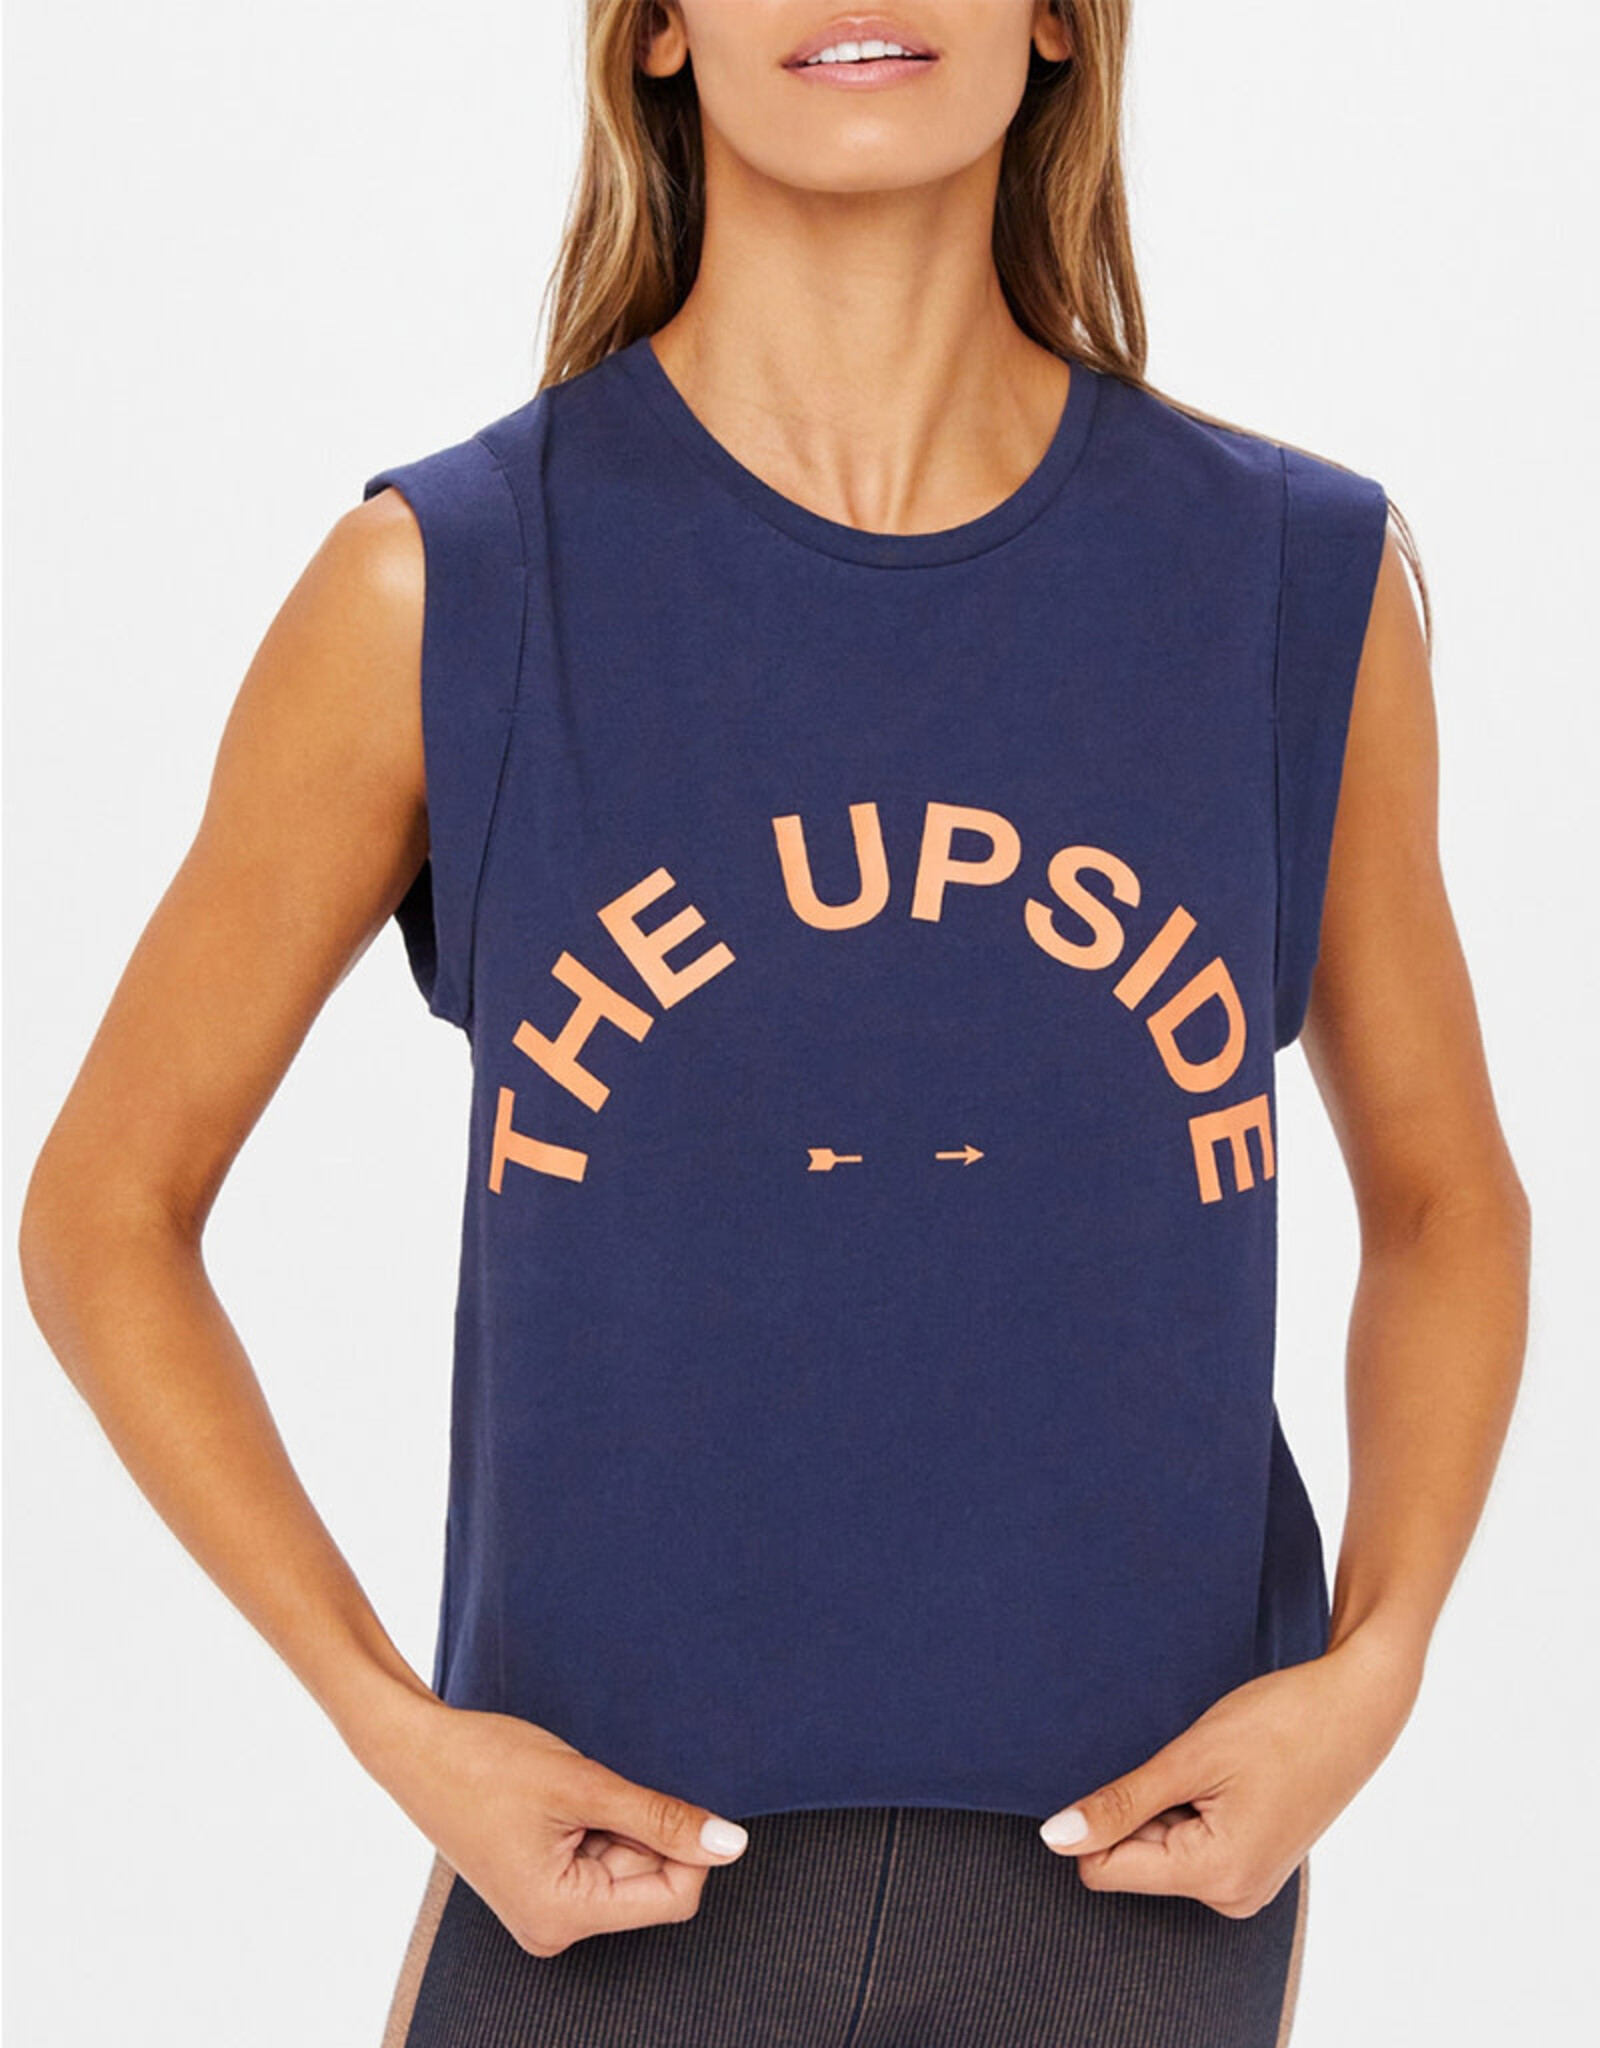 THE UPSIDE CROPPED MUSCLE TANK